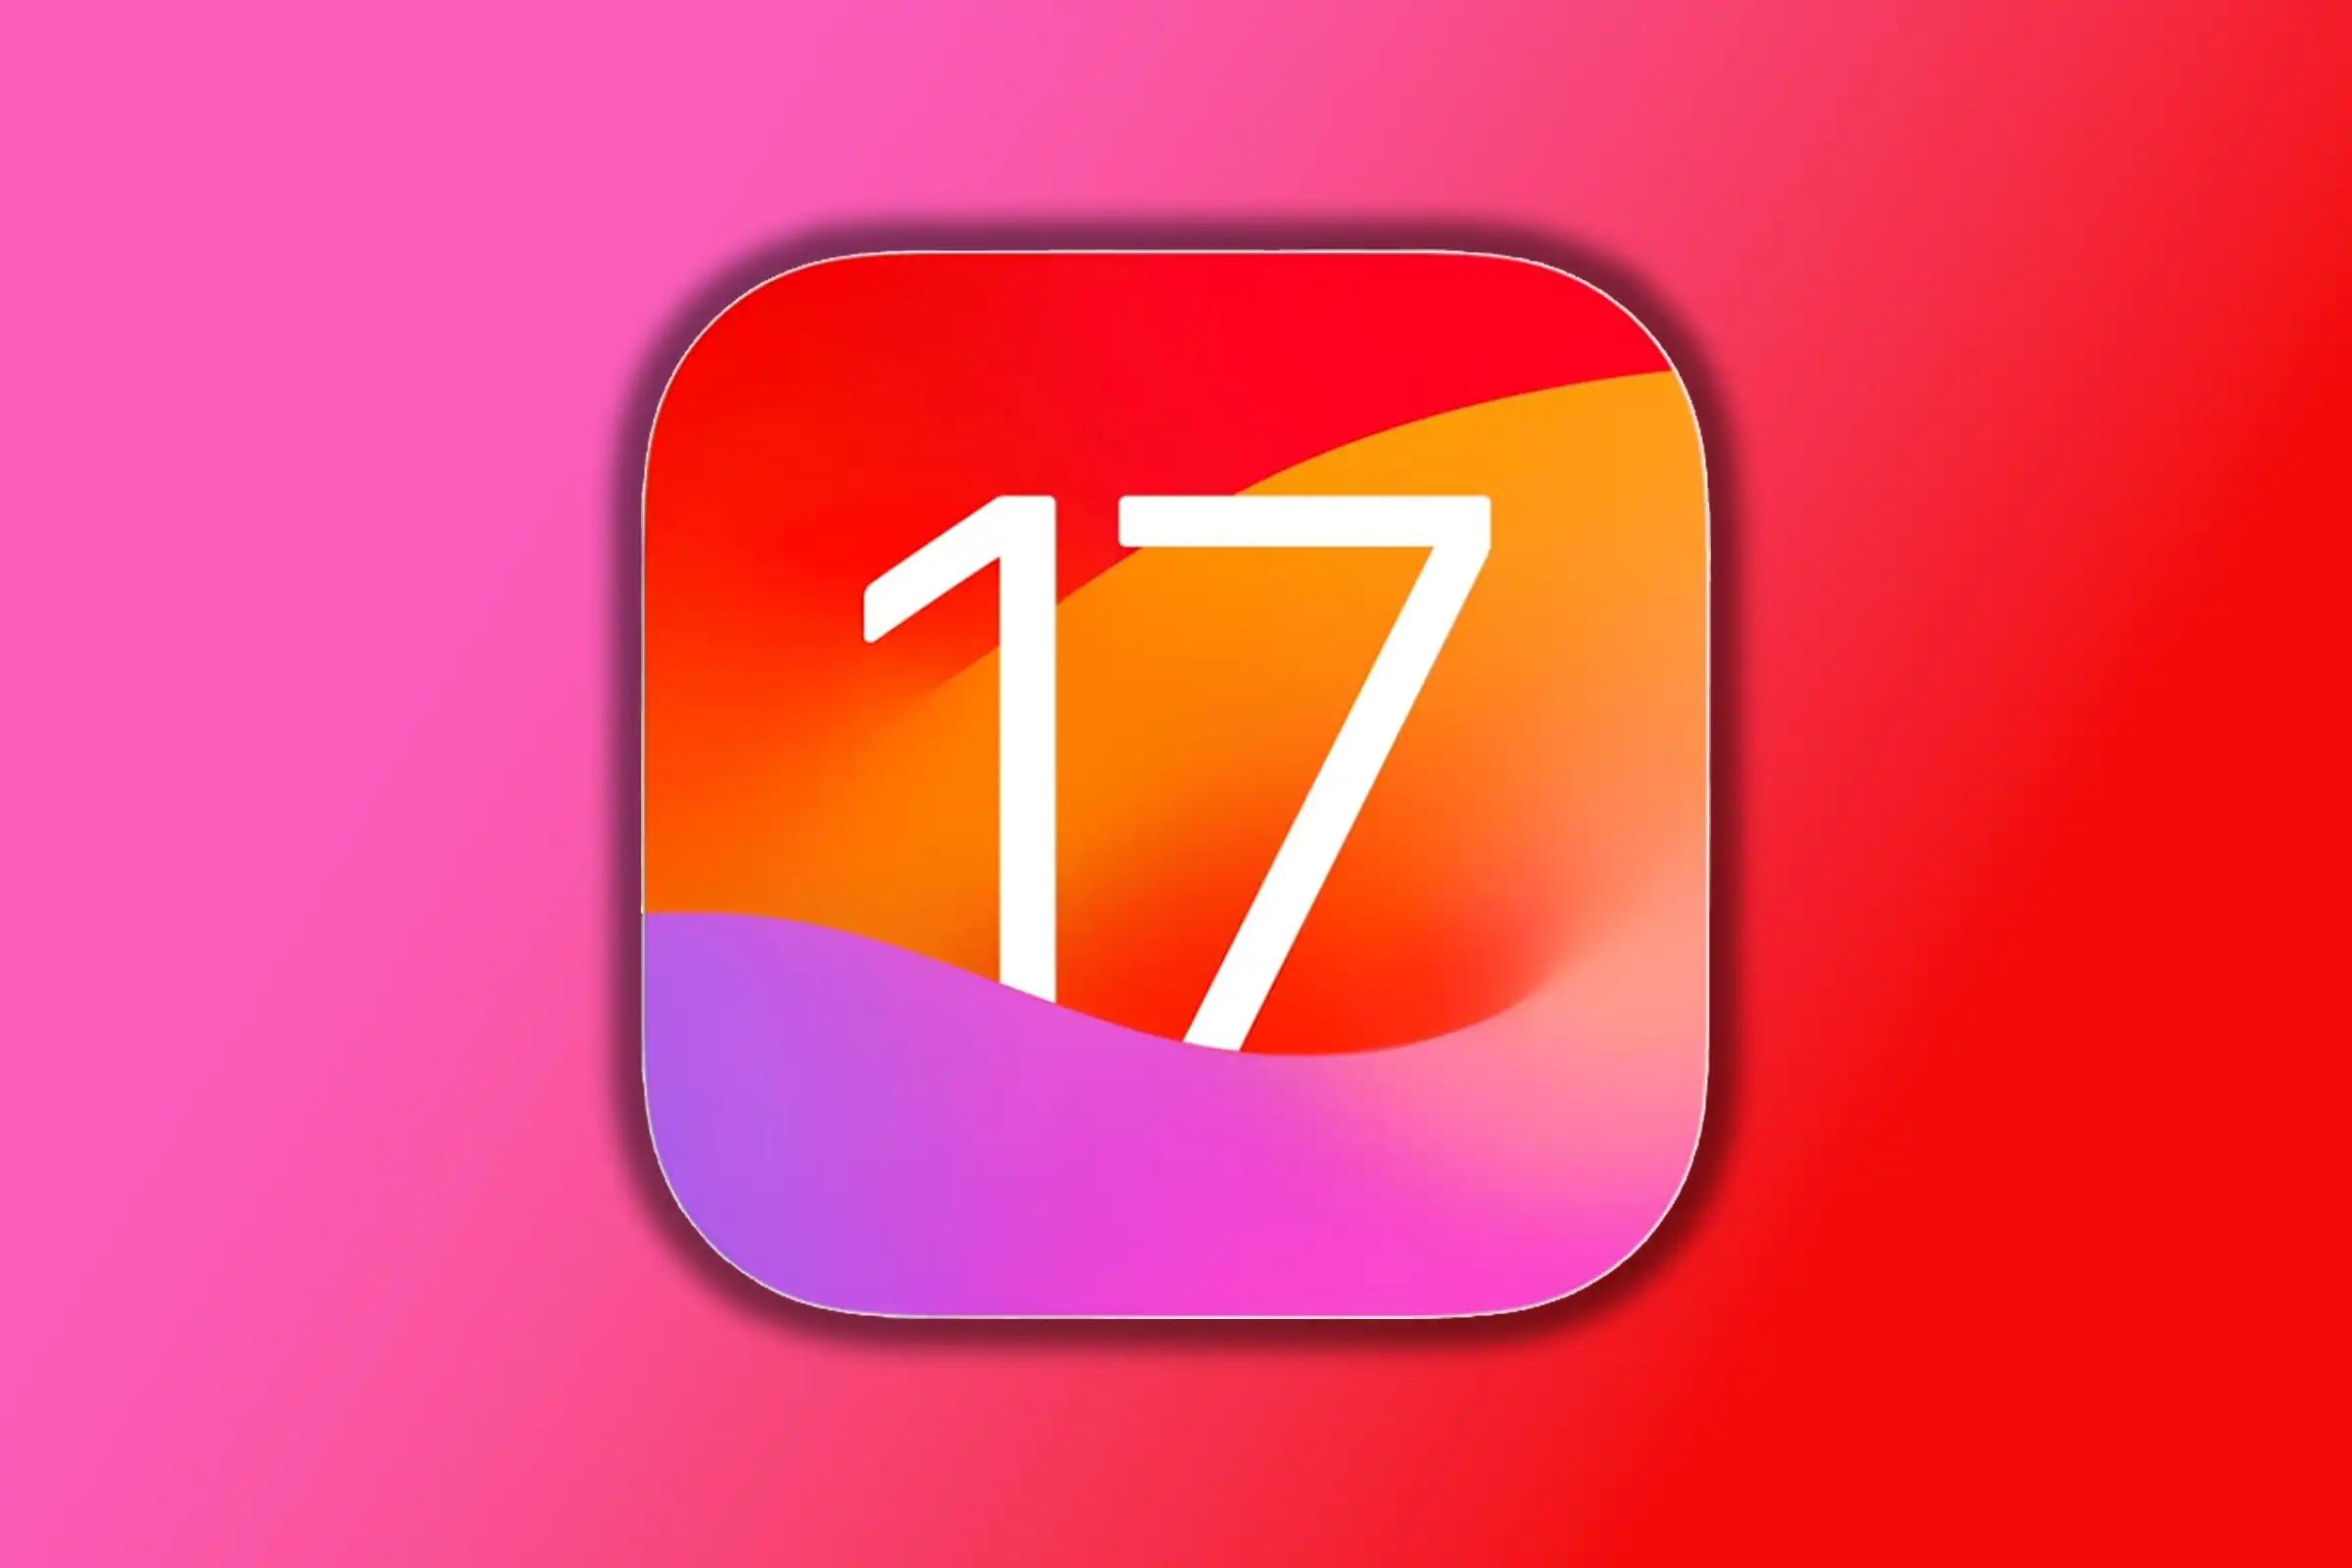 iOS 17 Superguide: What’s New in iOS 17